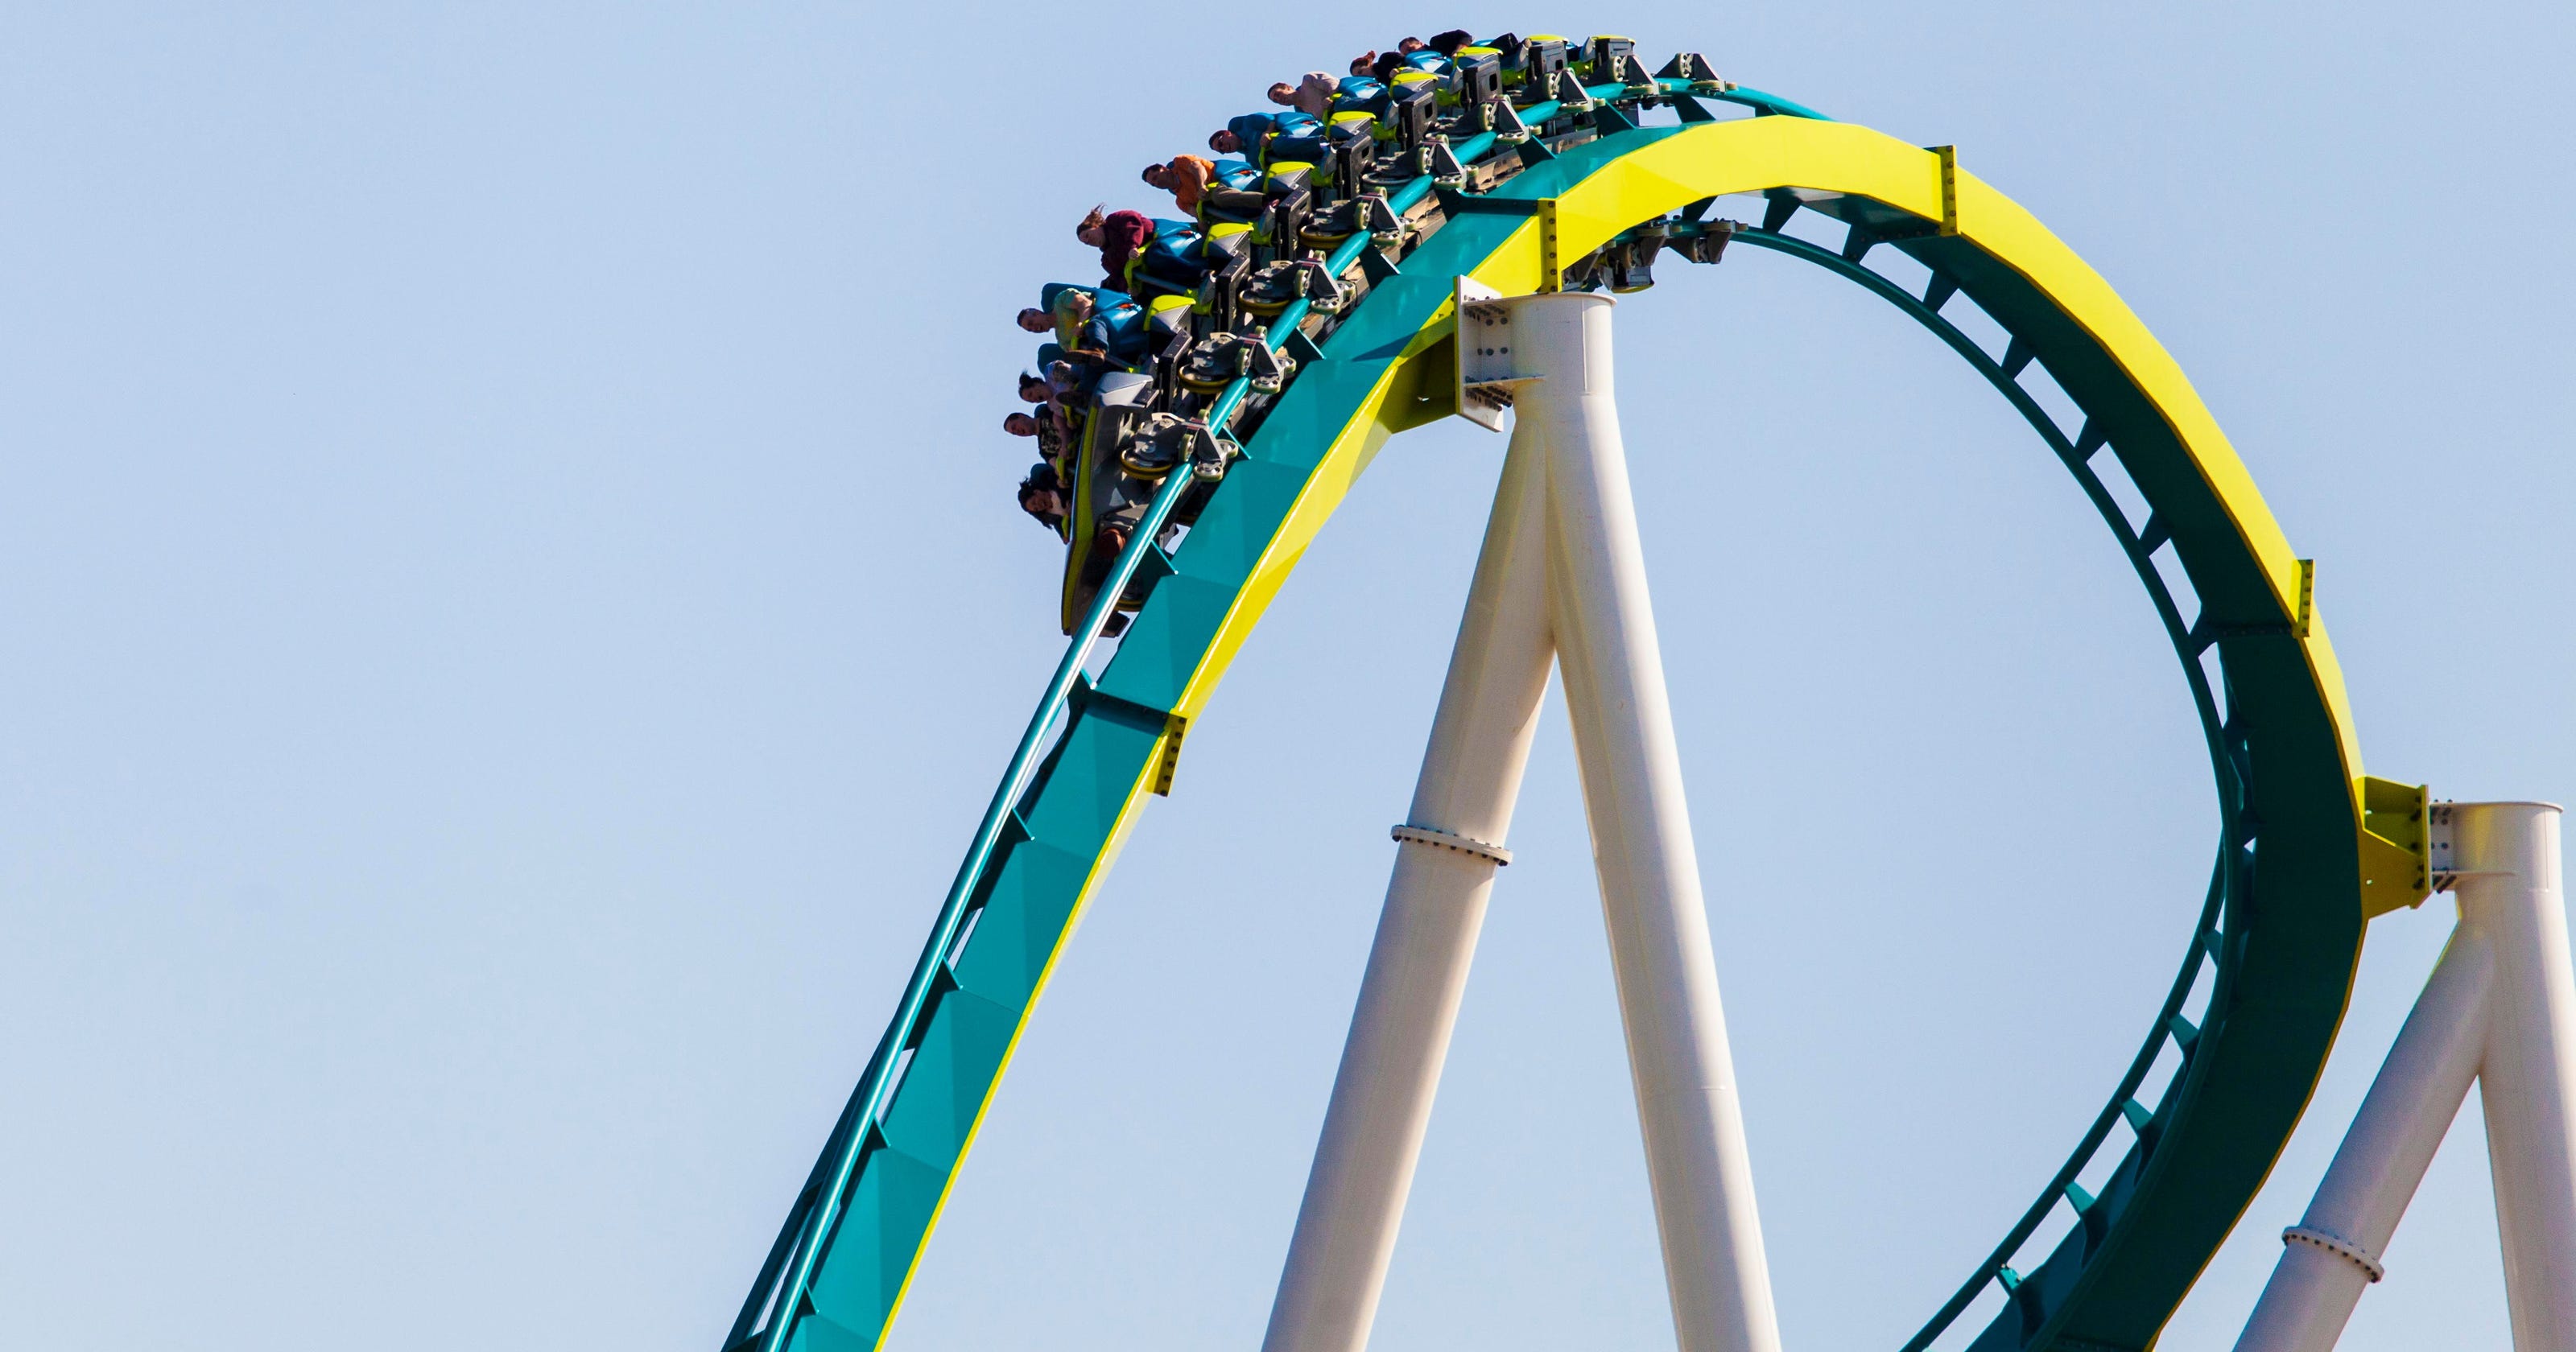 Listed The best states for roller coasters